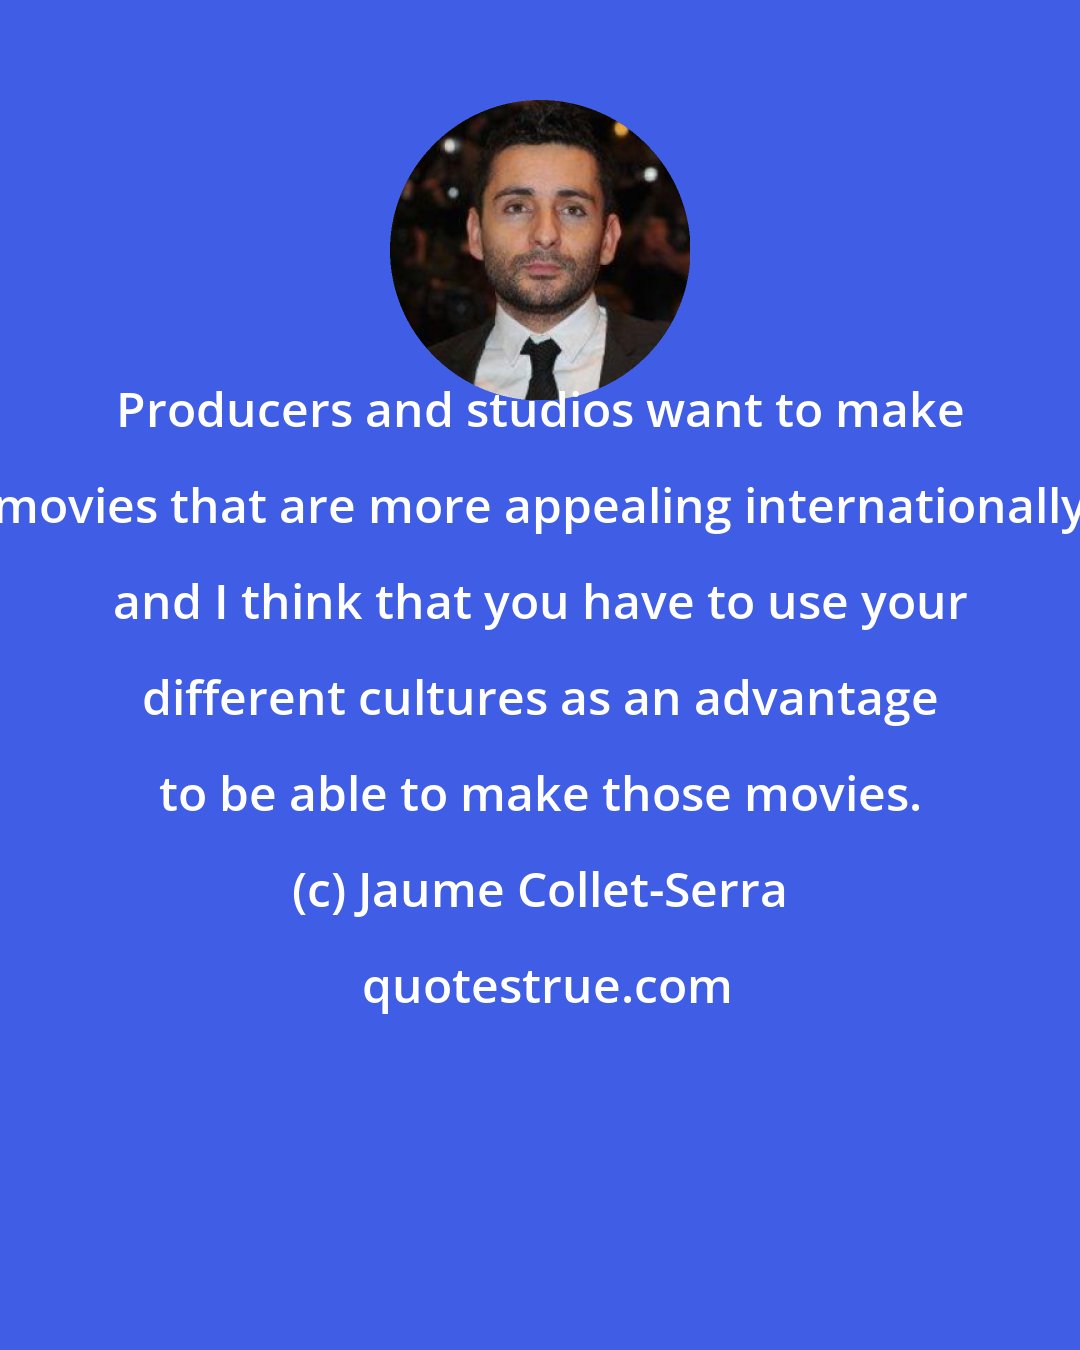 Jaume Collet-Serra: Producers and studios want to make movies that are more appealing internationally and I think that you have to use your different cultures as an advantage to be able to make those movies.